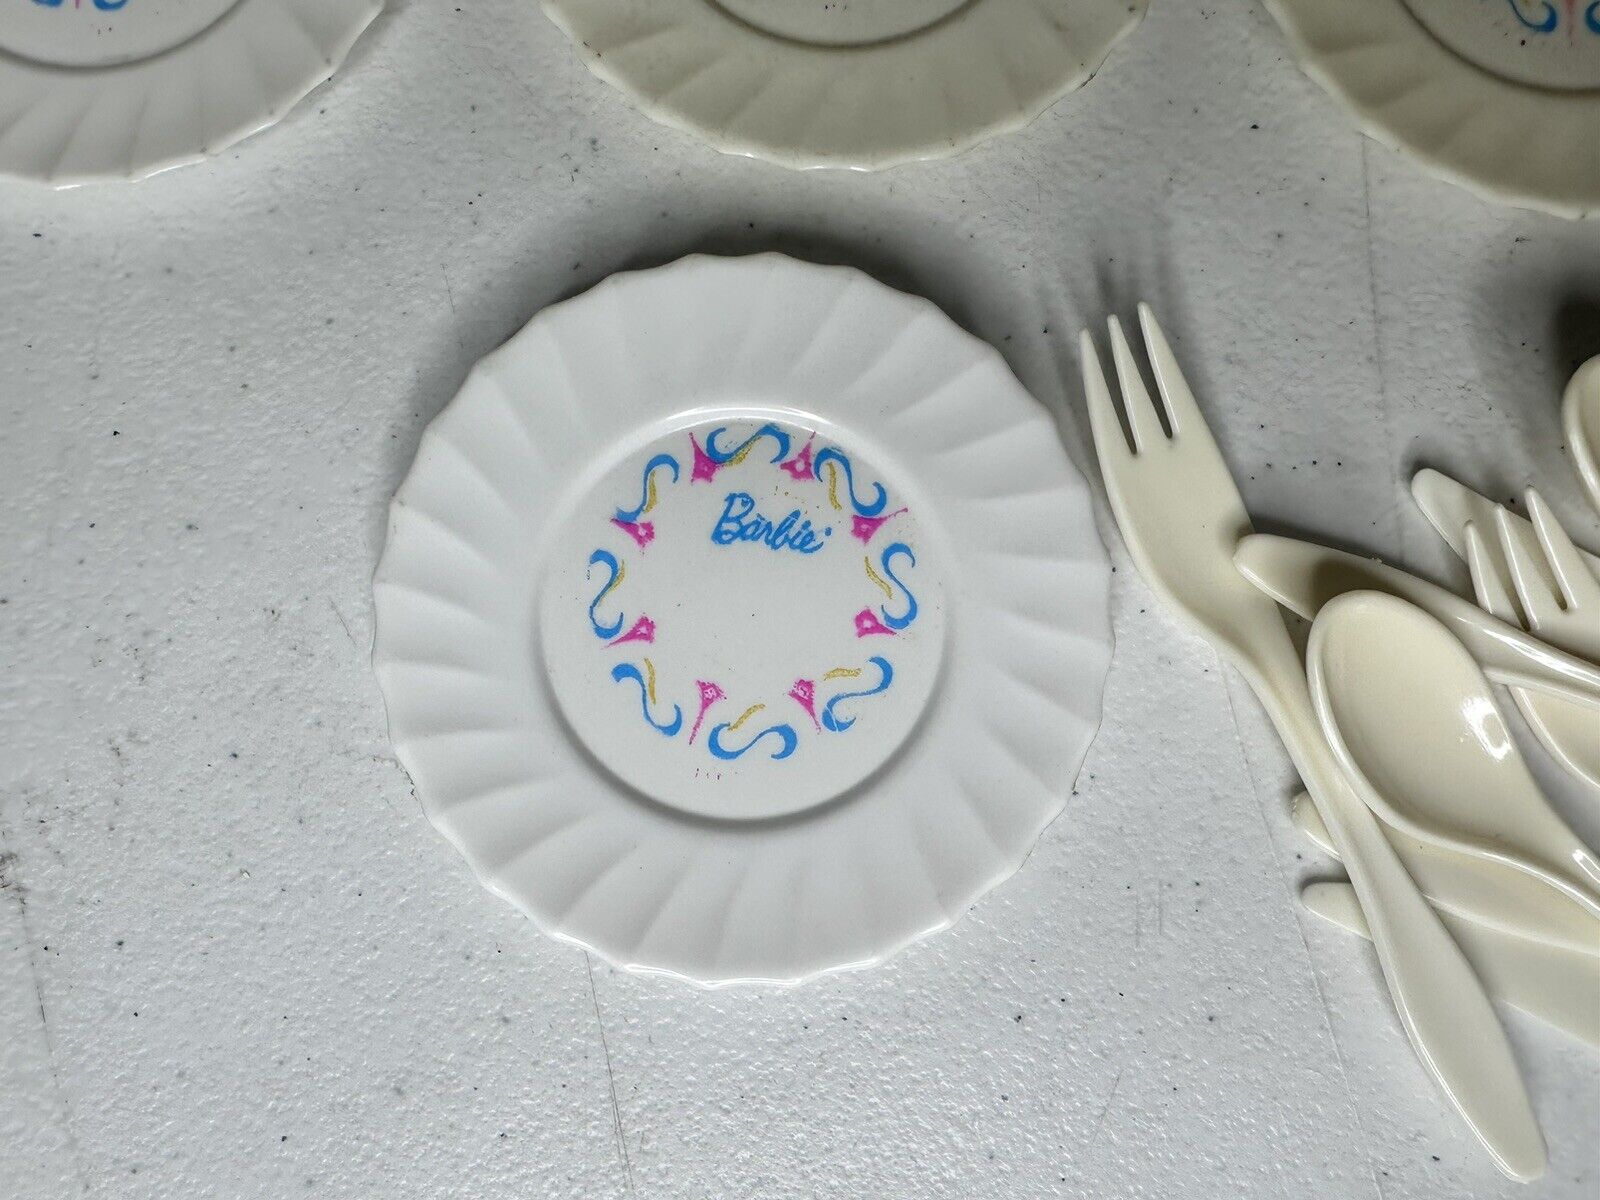 Rare Vintage Barbie HG NYC Collectible Paper Plates and Matching Cutlery Set - Party Dish Set - TreasuTiques